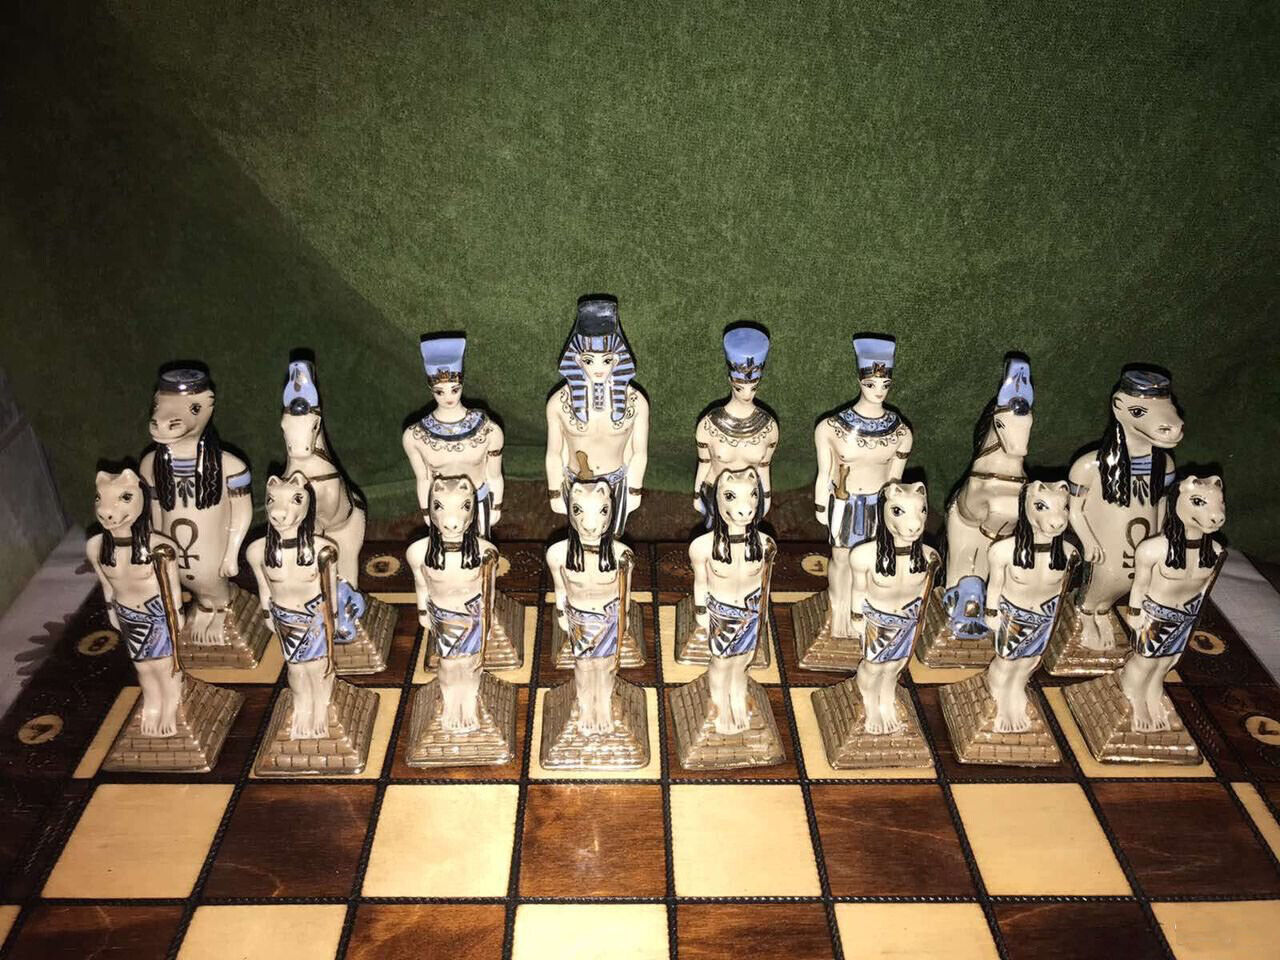 Russian Porcelain Chess Pieces Egyptian Style. Kislovodsk